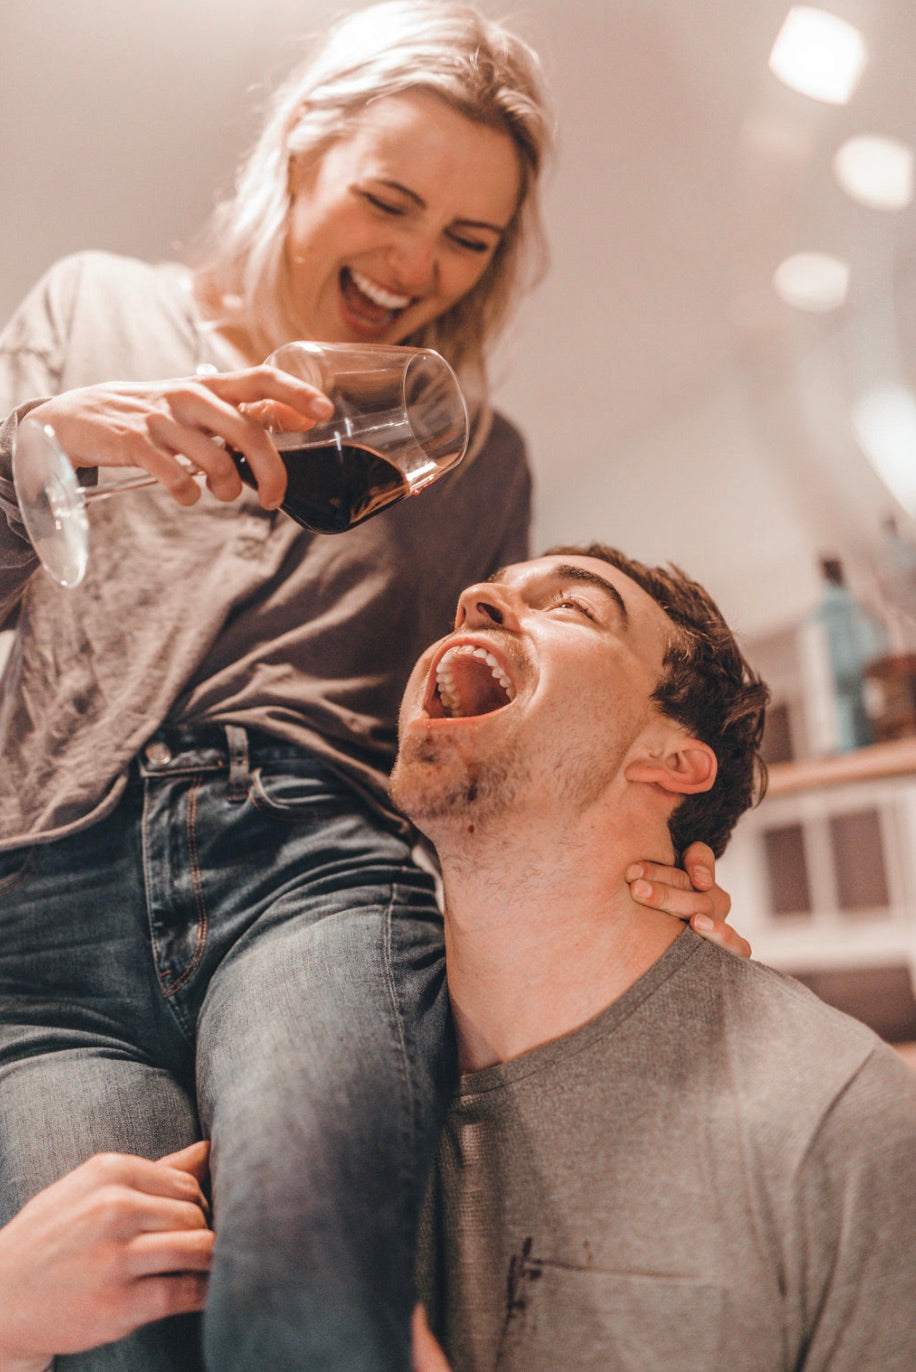 Wife sitting on husband's shoulder and playfully making him drink wine from above